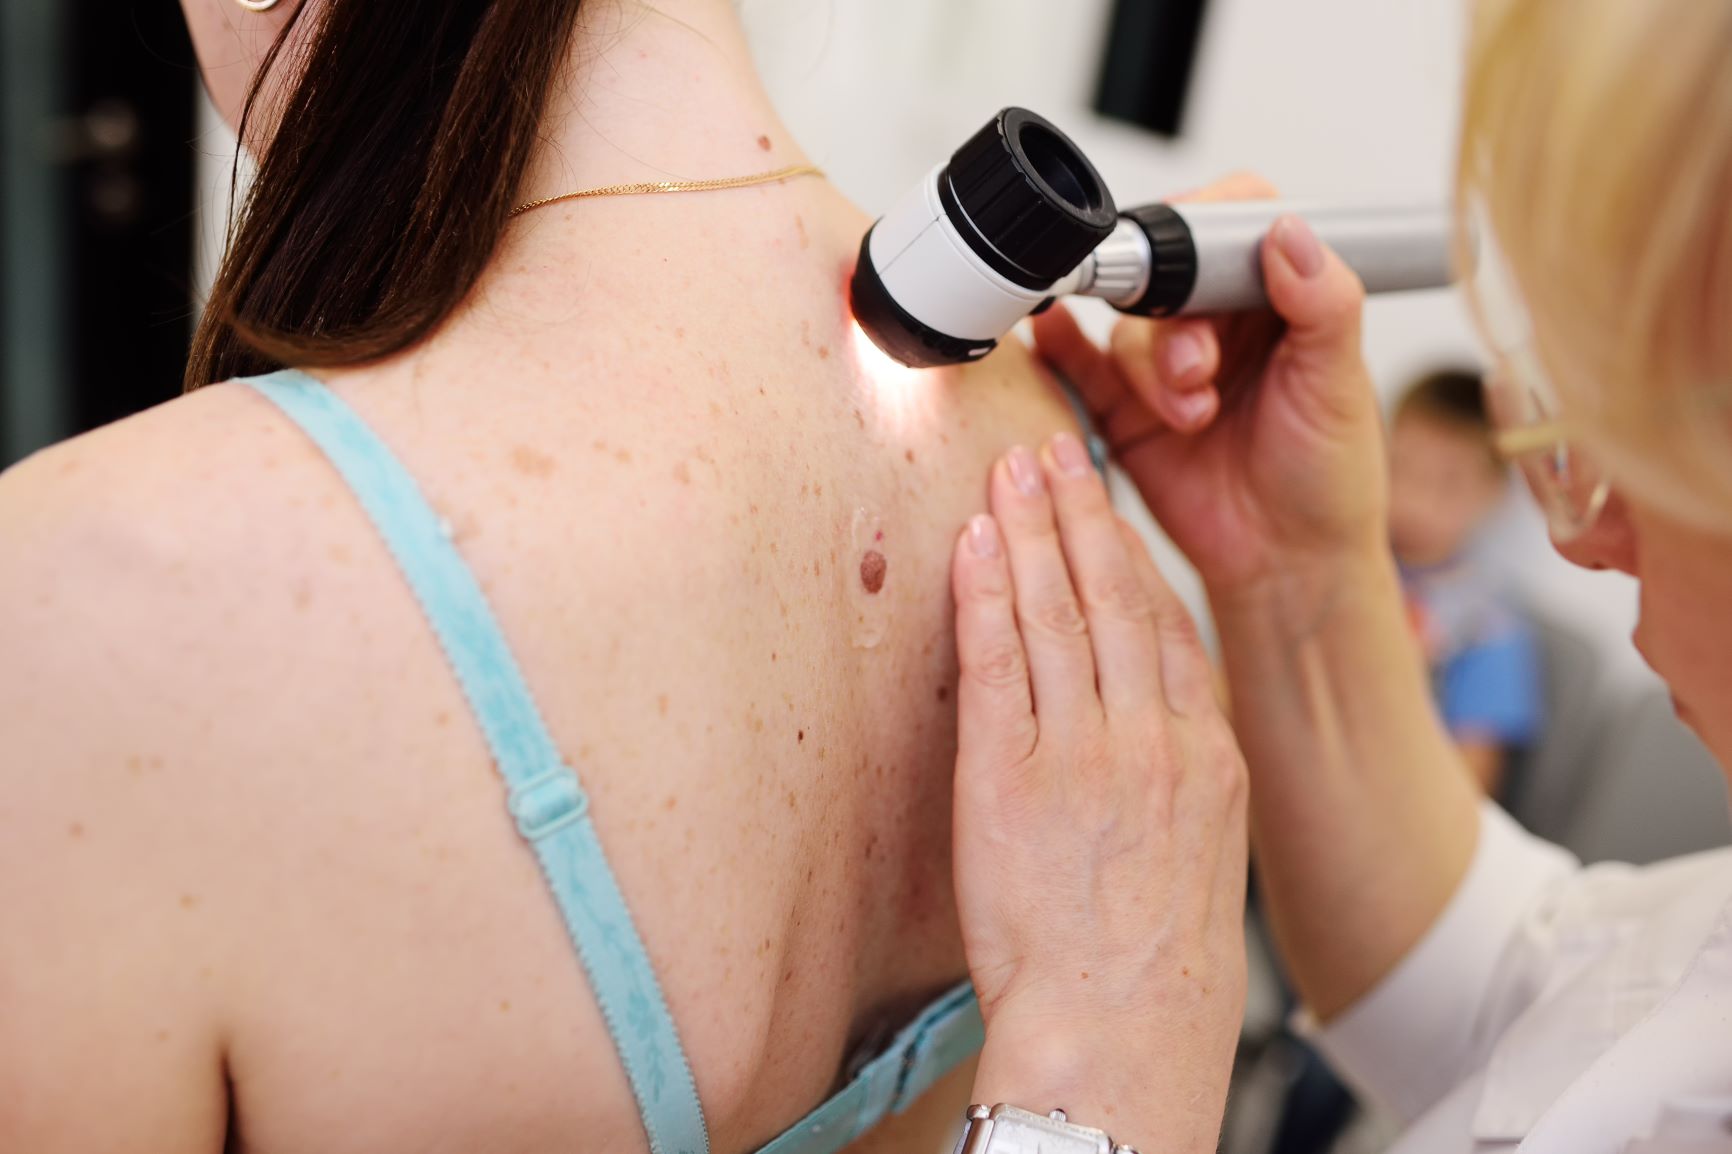 A patients back being examined with a dermascope